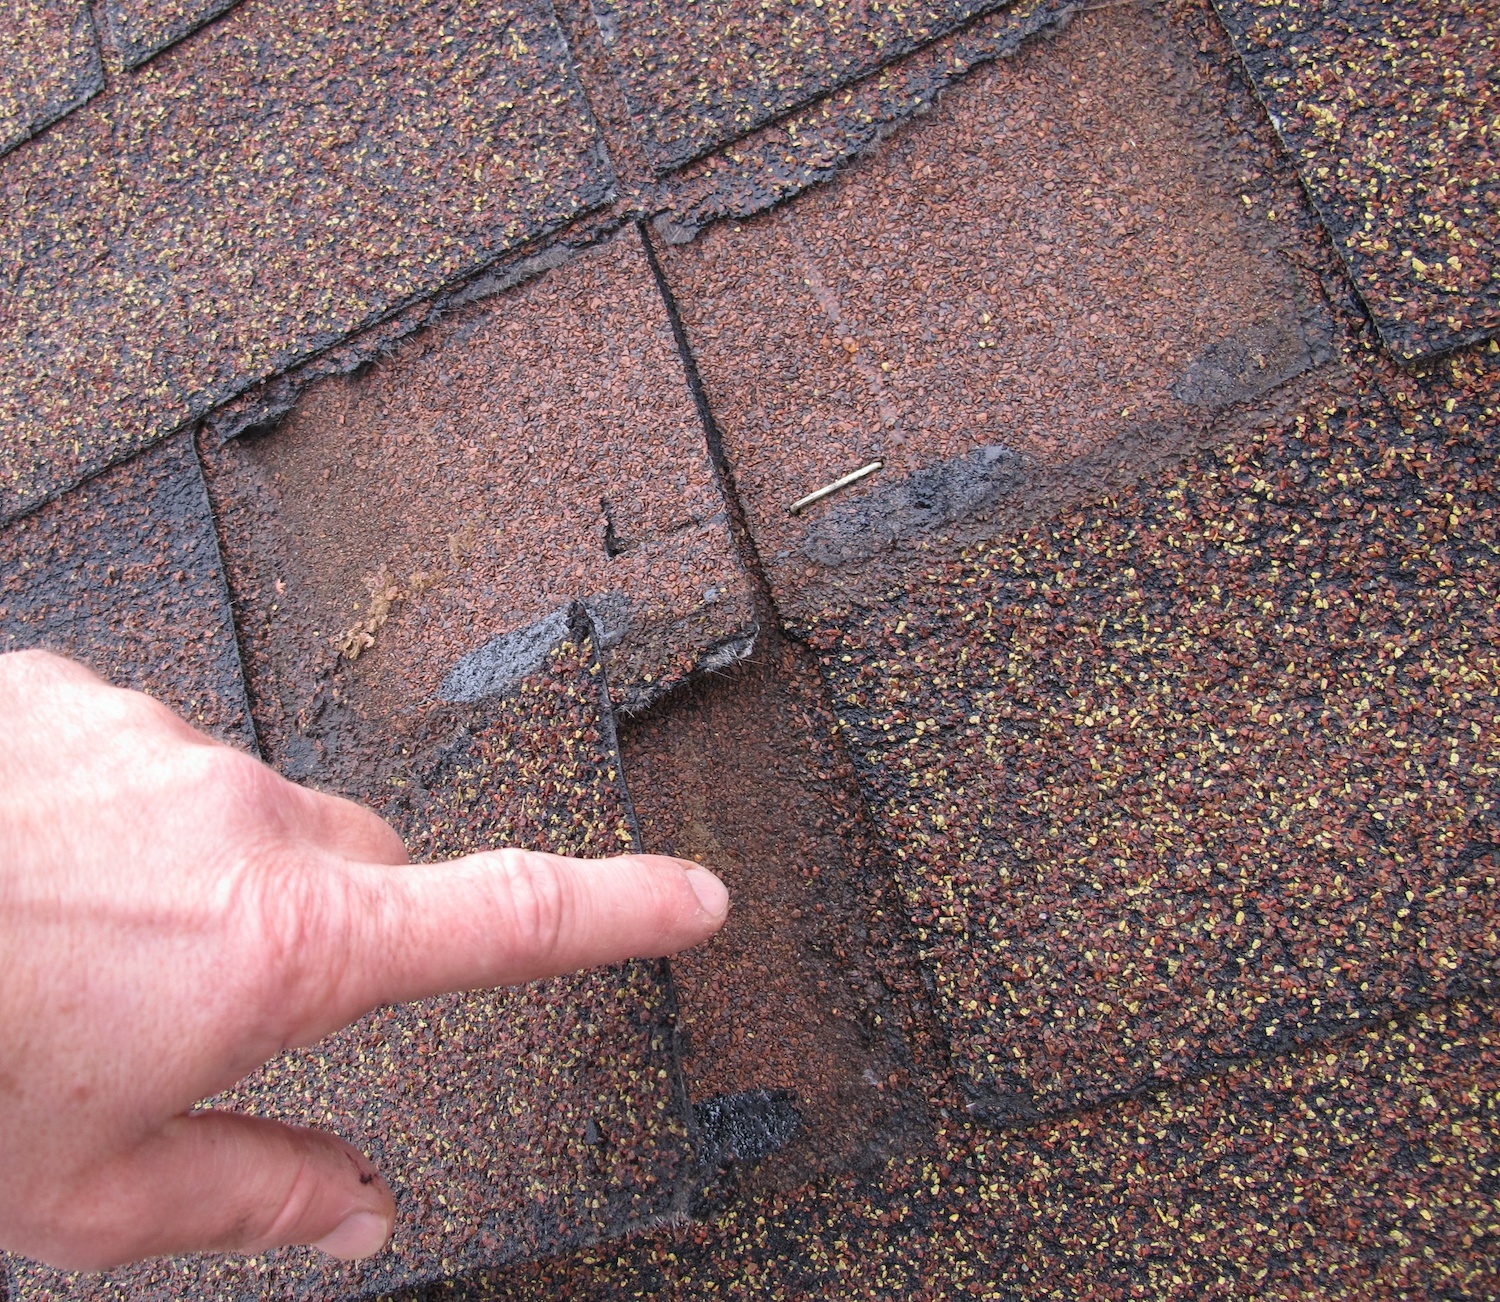 Shingle damage and missing shingles on a roof.